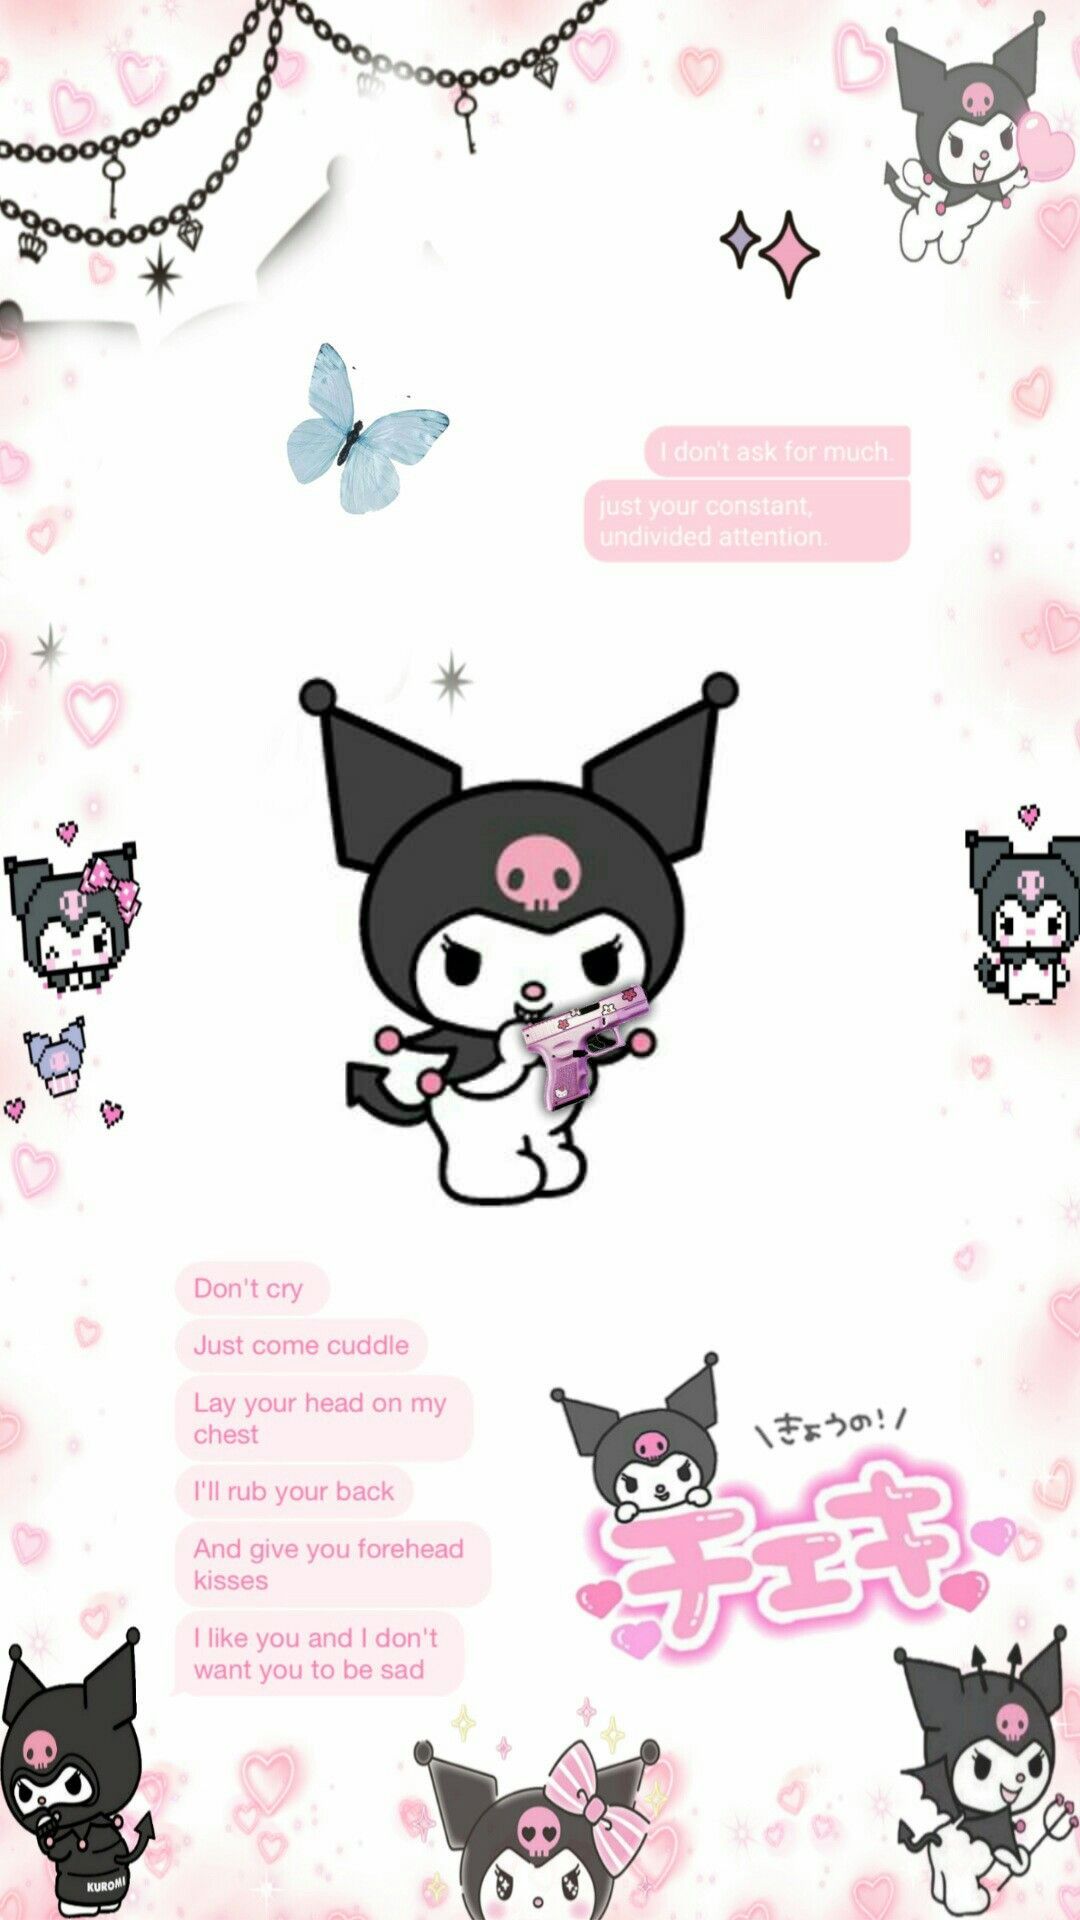 A cute cartoon cat with pink and black color - Kuromi